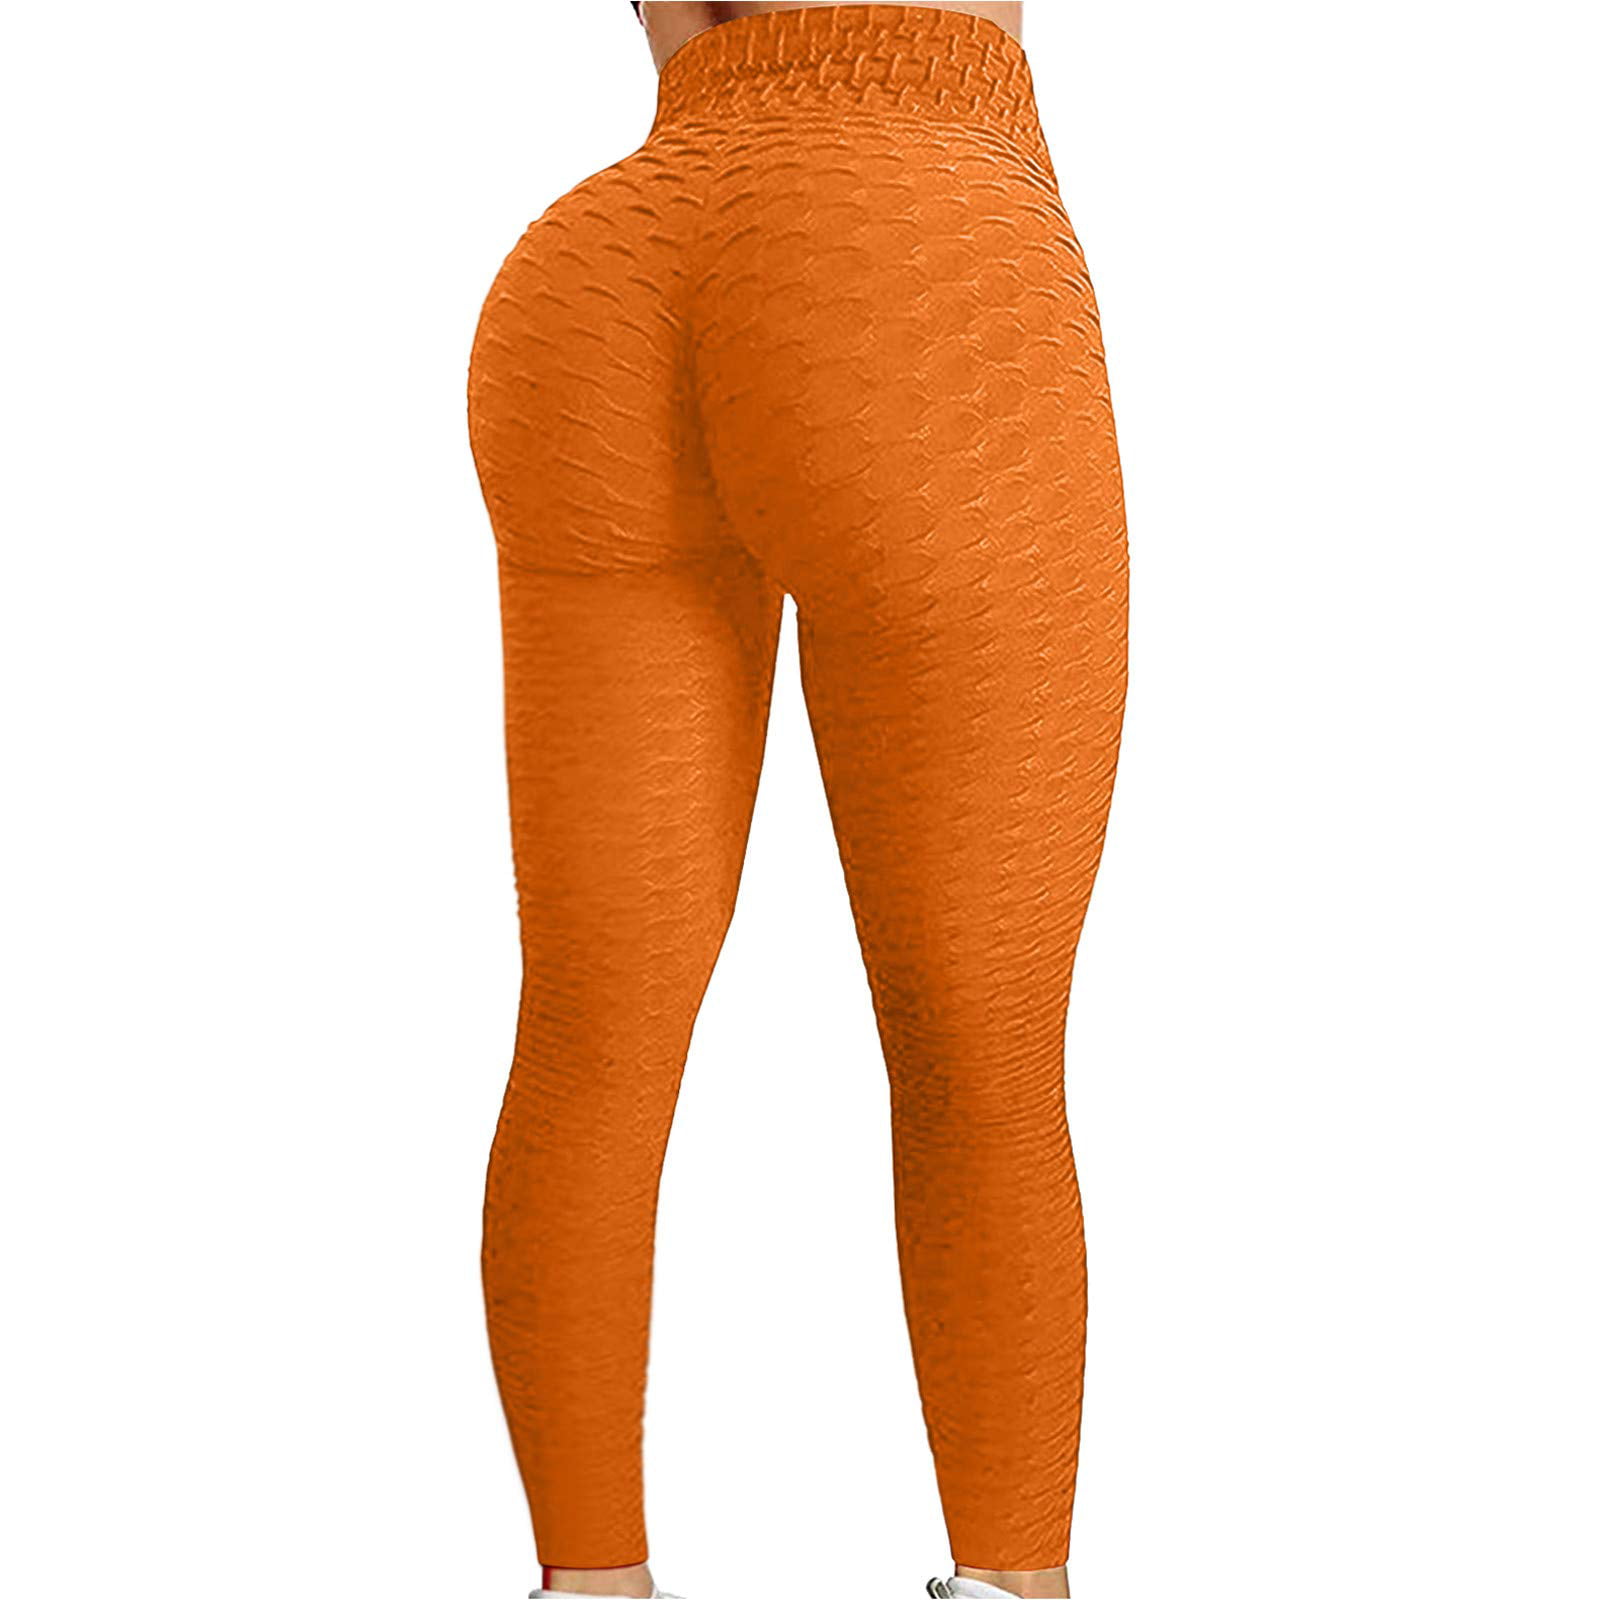 Details about   Women Anti-Cellulite Gym Yoga Pants High Waist Ruched Butt Lift Leggings Fitness 